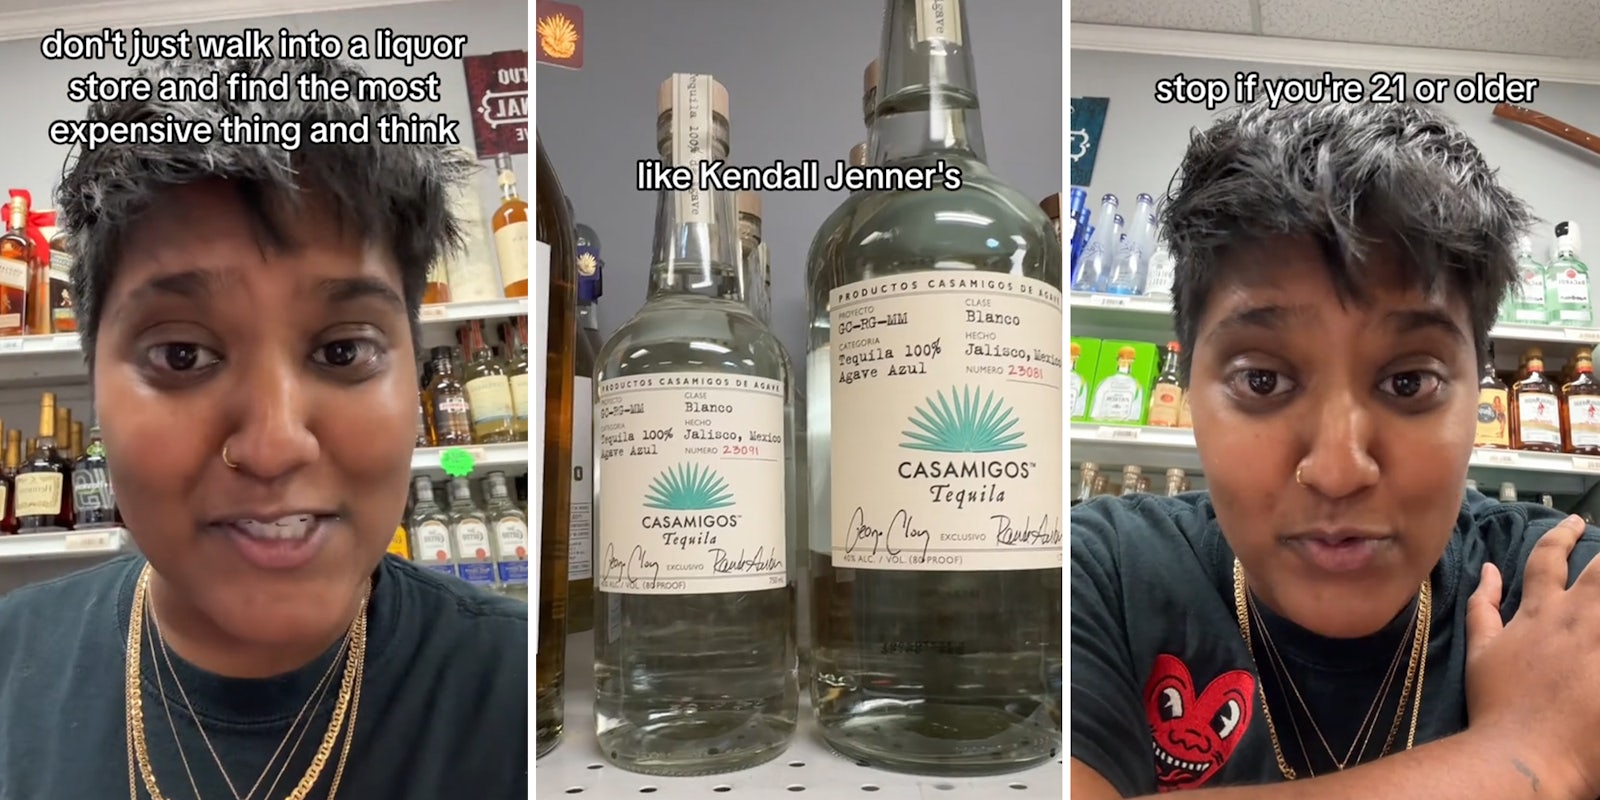 Liquor store worker shares industry secrets 'companies don't want you to know'